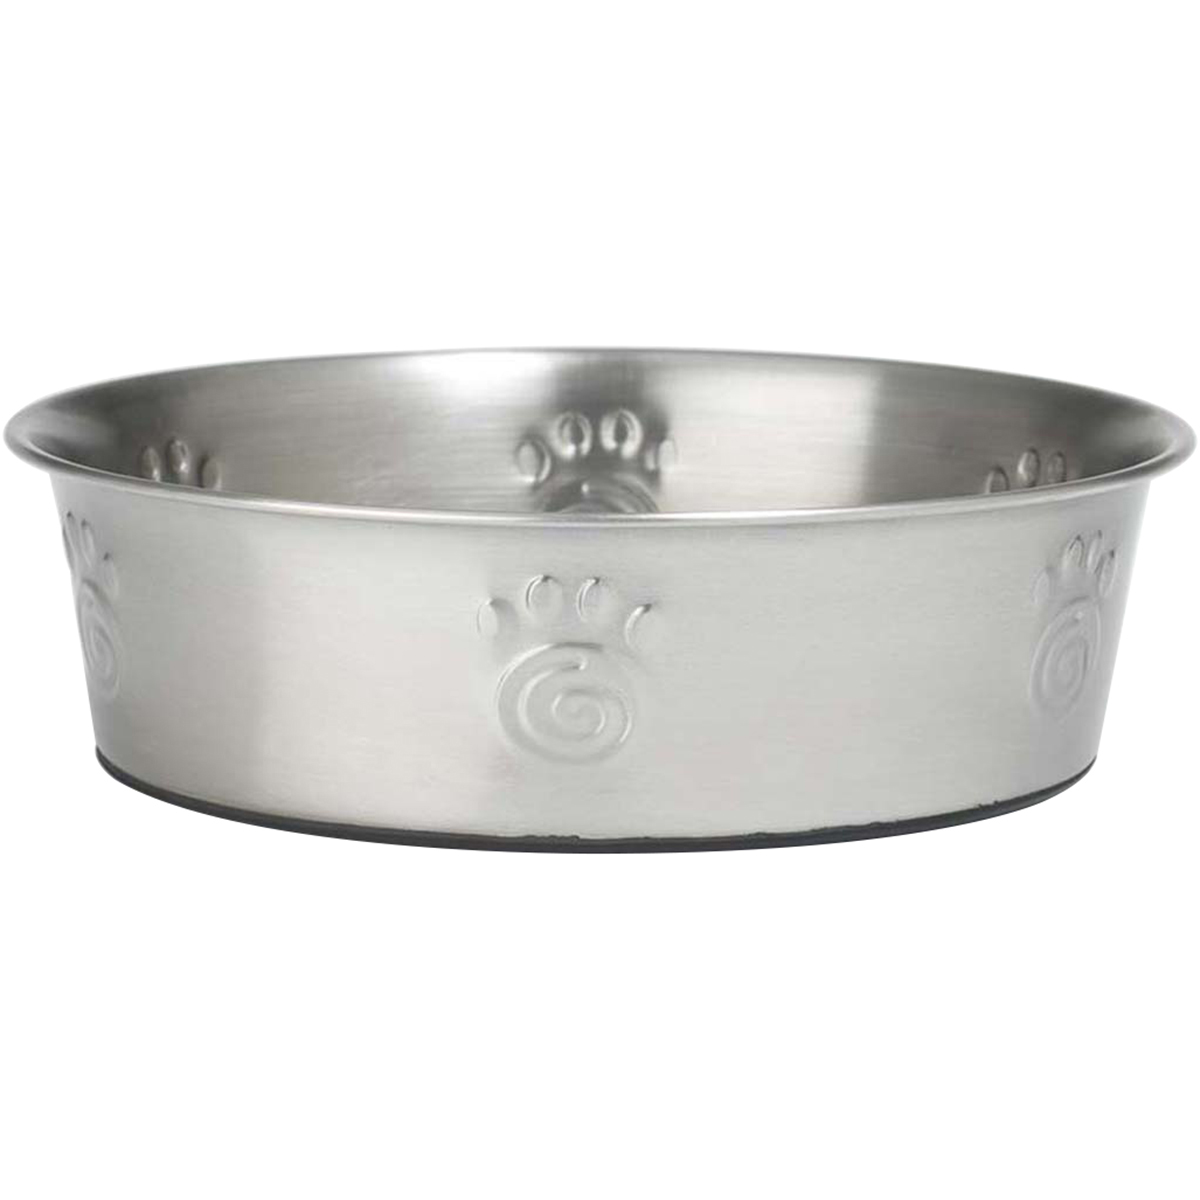 Cayman Stainless Steel Bowl